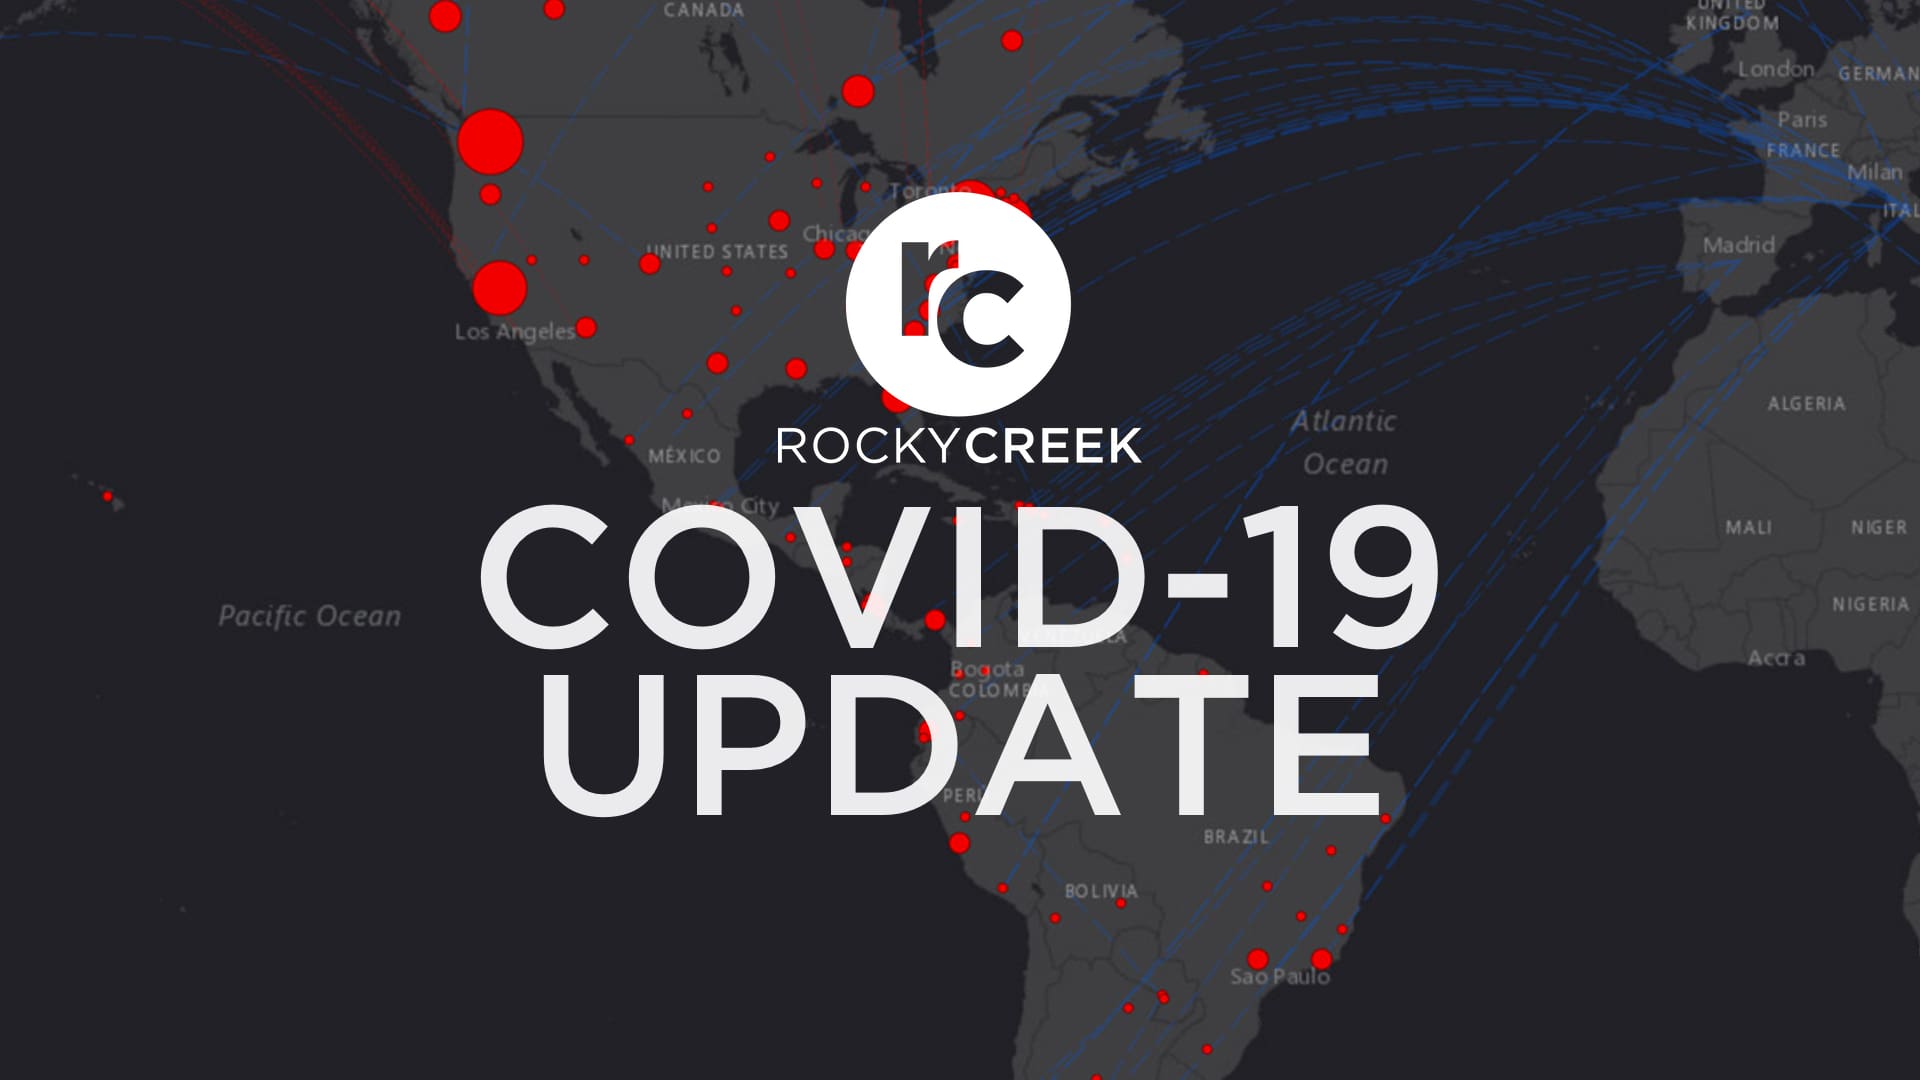 COVID-19 Update for Rocky Creek